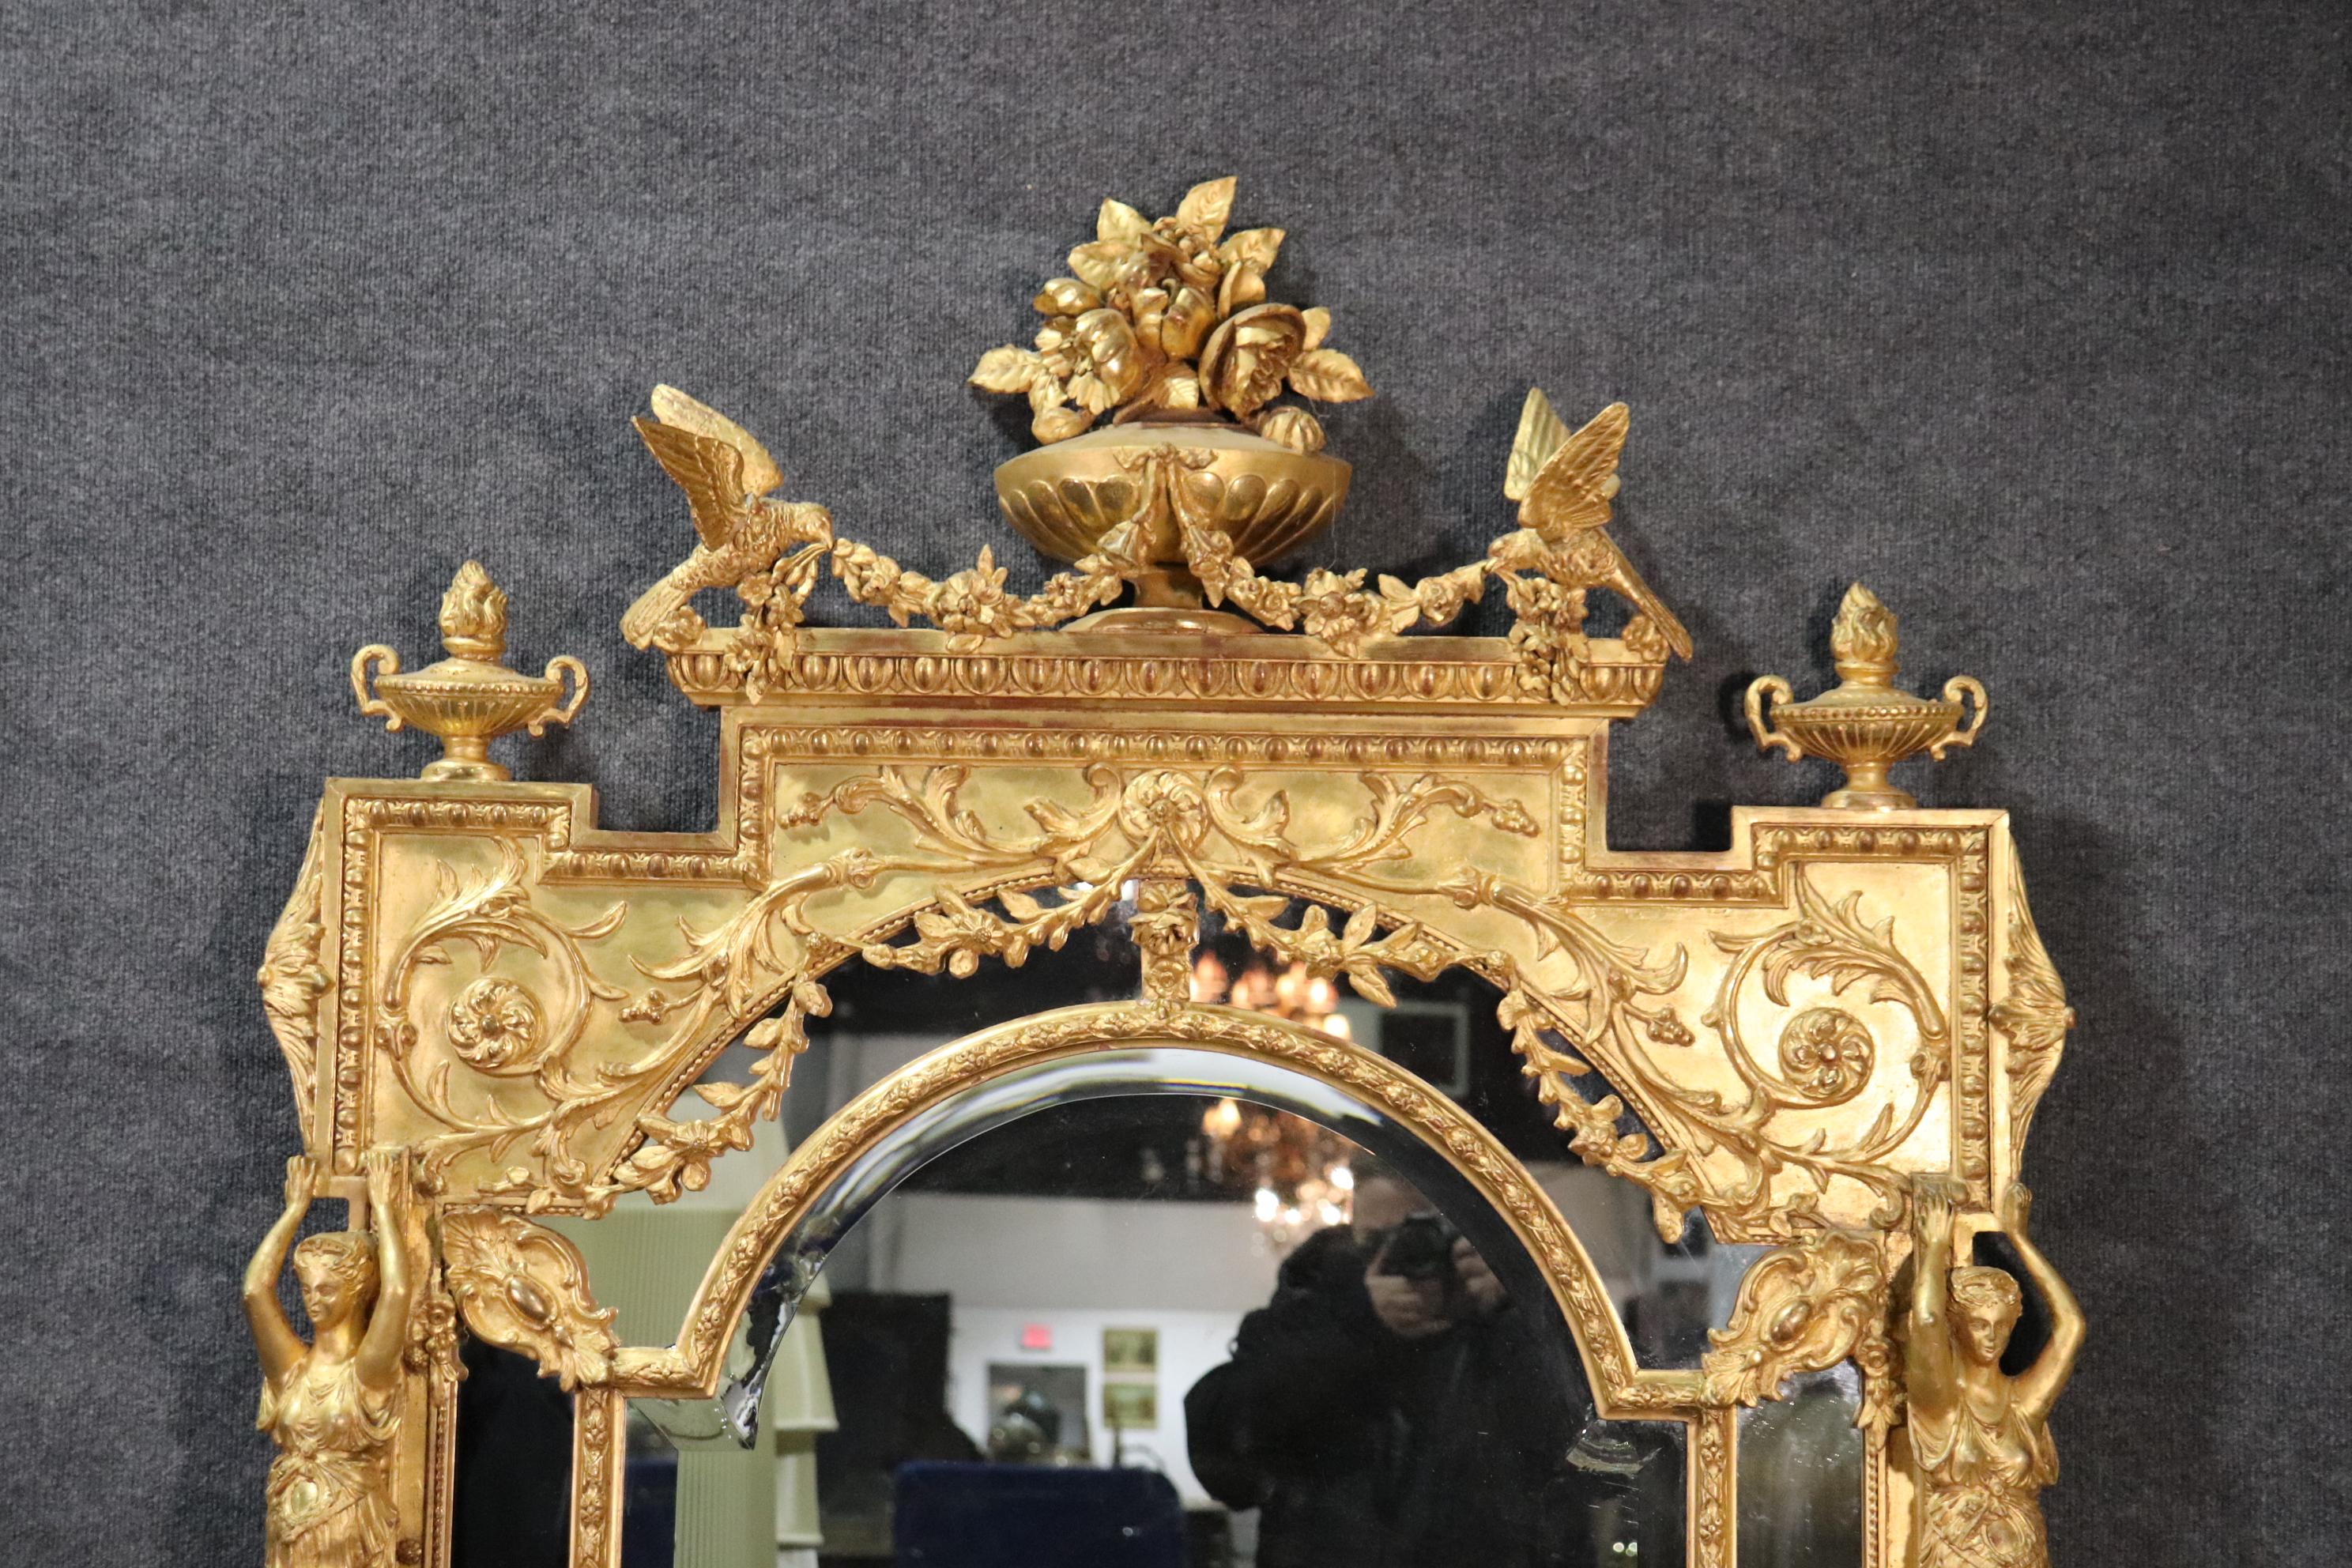 19th Century Monumental Giltwood French Regence Figural Mirror with Maidens and Birds